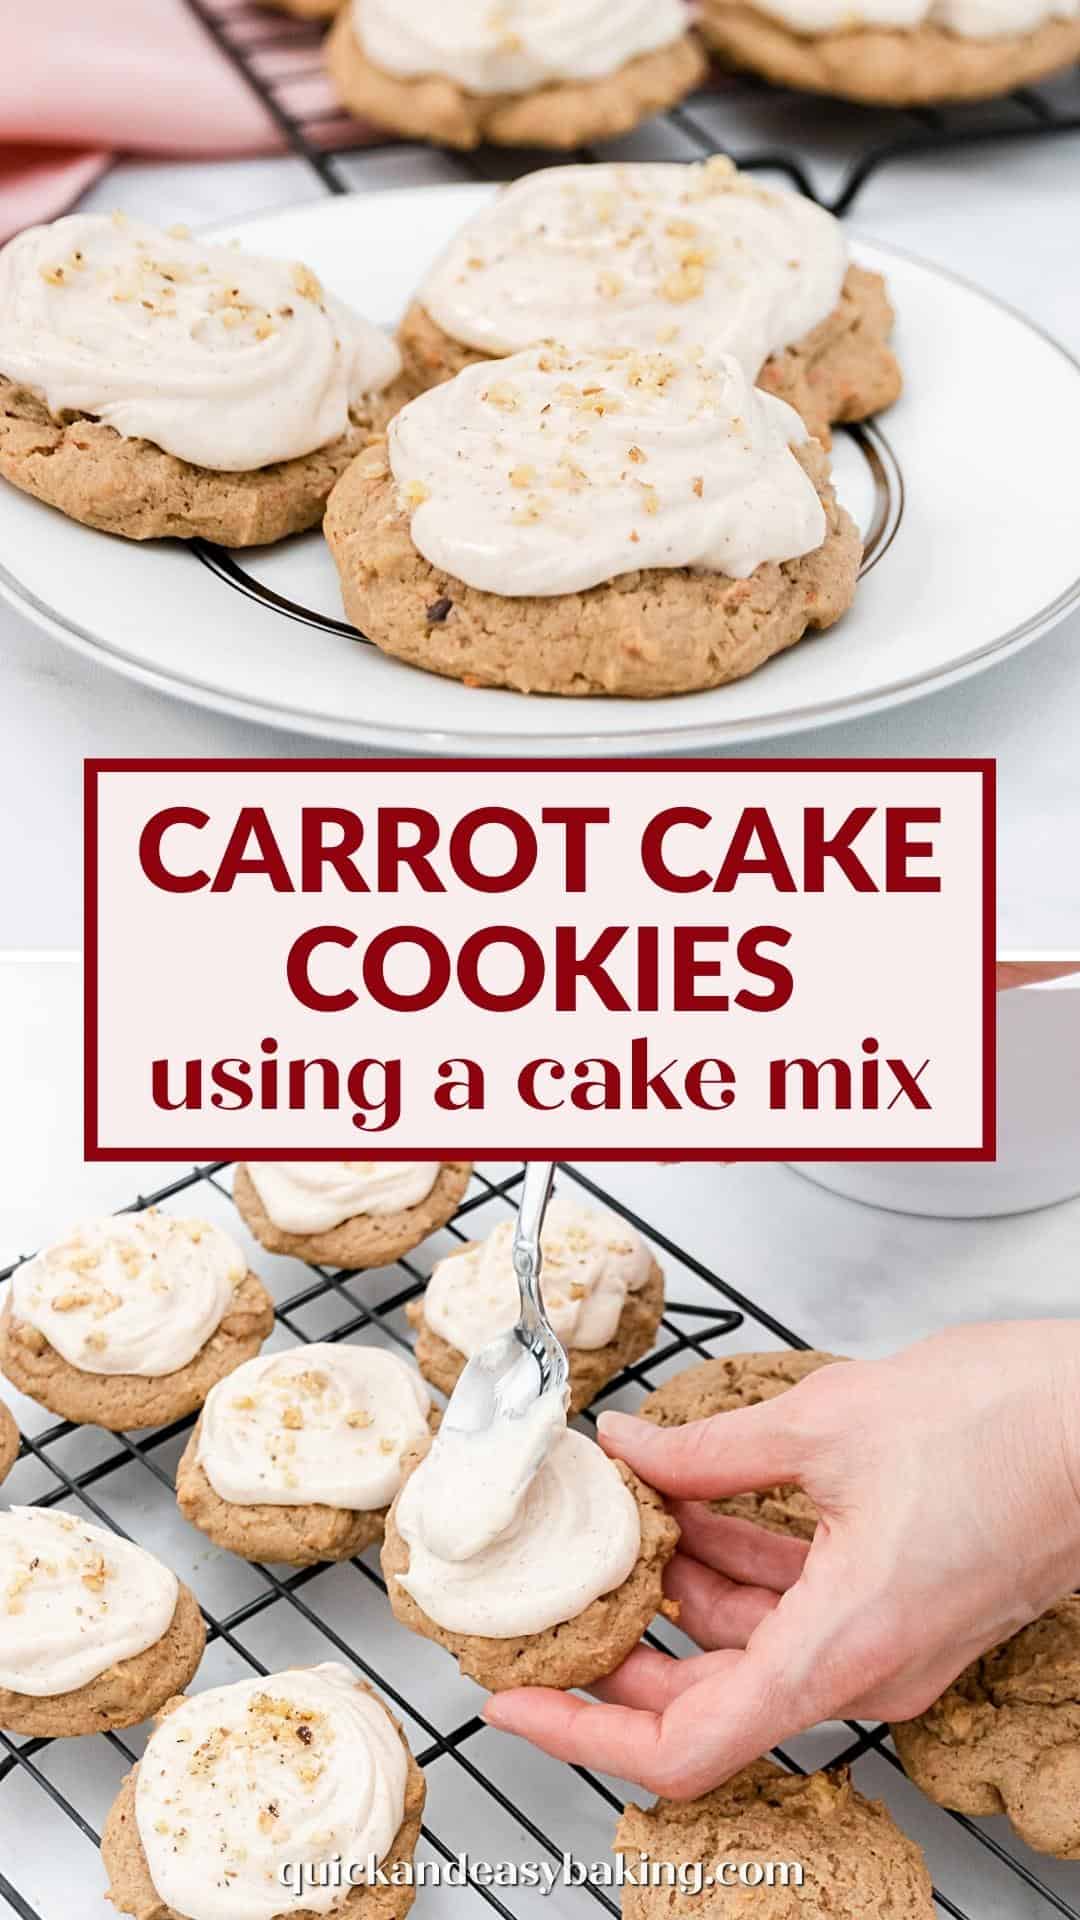 Carrot cake cookies with text overlay pin.